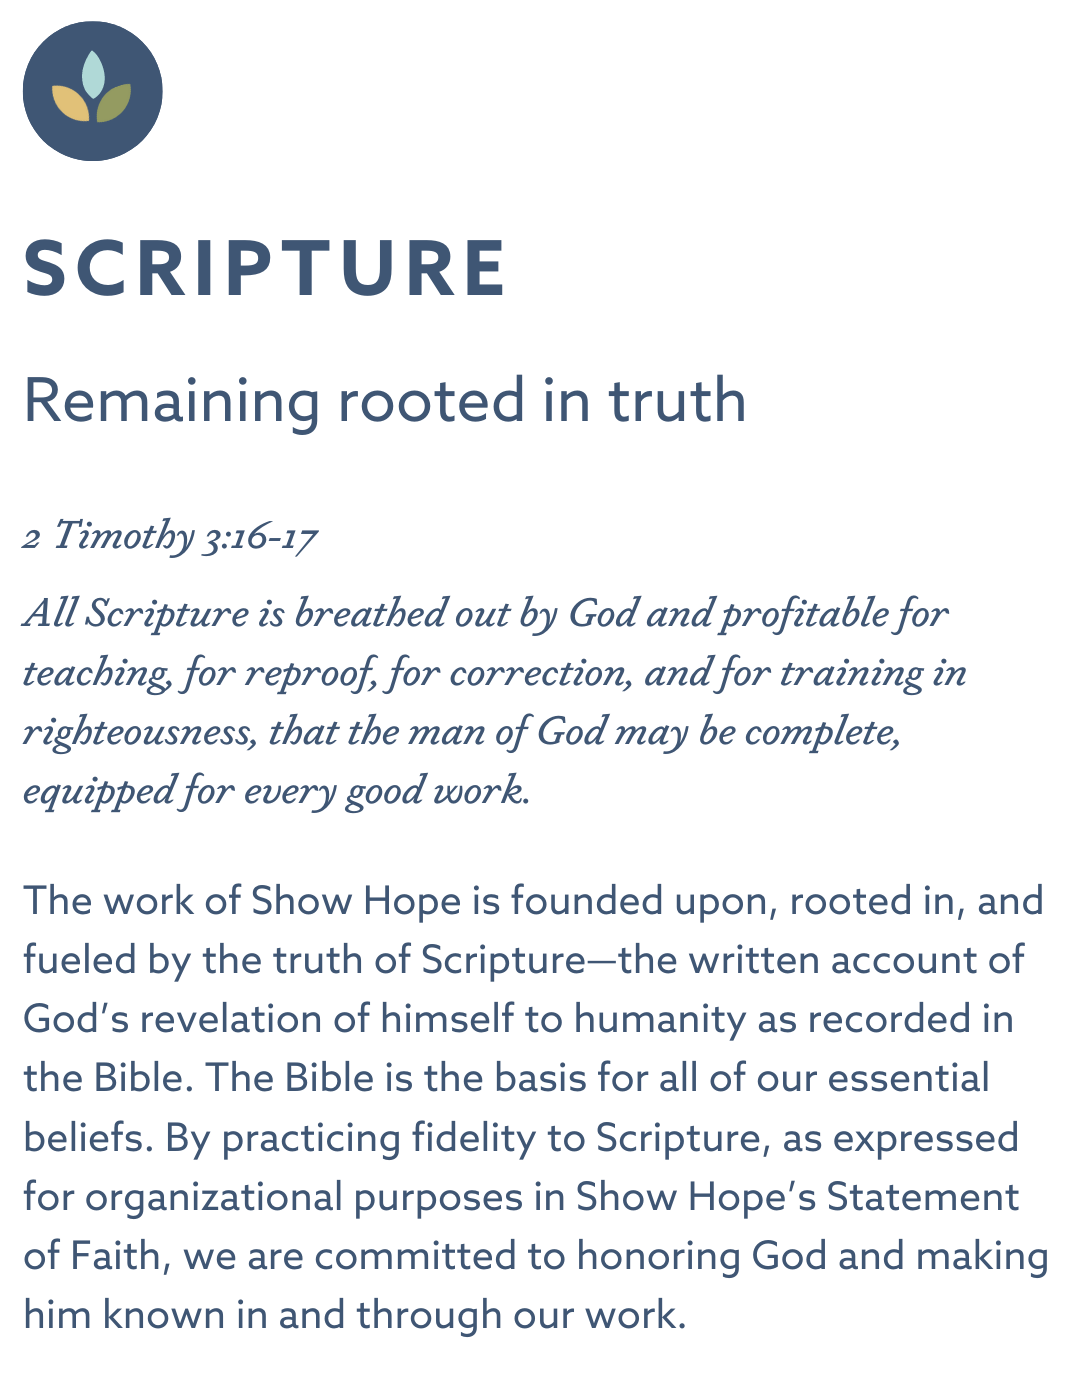 SCRIPTURE Remaining rooted in truth 2 Timothy 3:16-17 “All Scripture is breathed out by God and profitable for teaching, for reproof, for correction, and for training in righteousness, that the man of God may be complete, equipped for every good work.” The work of Show Hope is founded upon, rooted in, and fueled by the truth of Scripture—the written account of God’s revelation of himself to humanity as recorded in the Bible. The Bible is the basis for all of our essential beliefs. By practicing fidelity to Scripture, as expressed for organizational purposes in Show Hope’s Statement of Faith, we are committed to honoring God and making him known in and through our work.